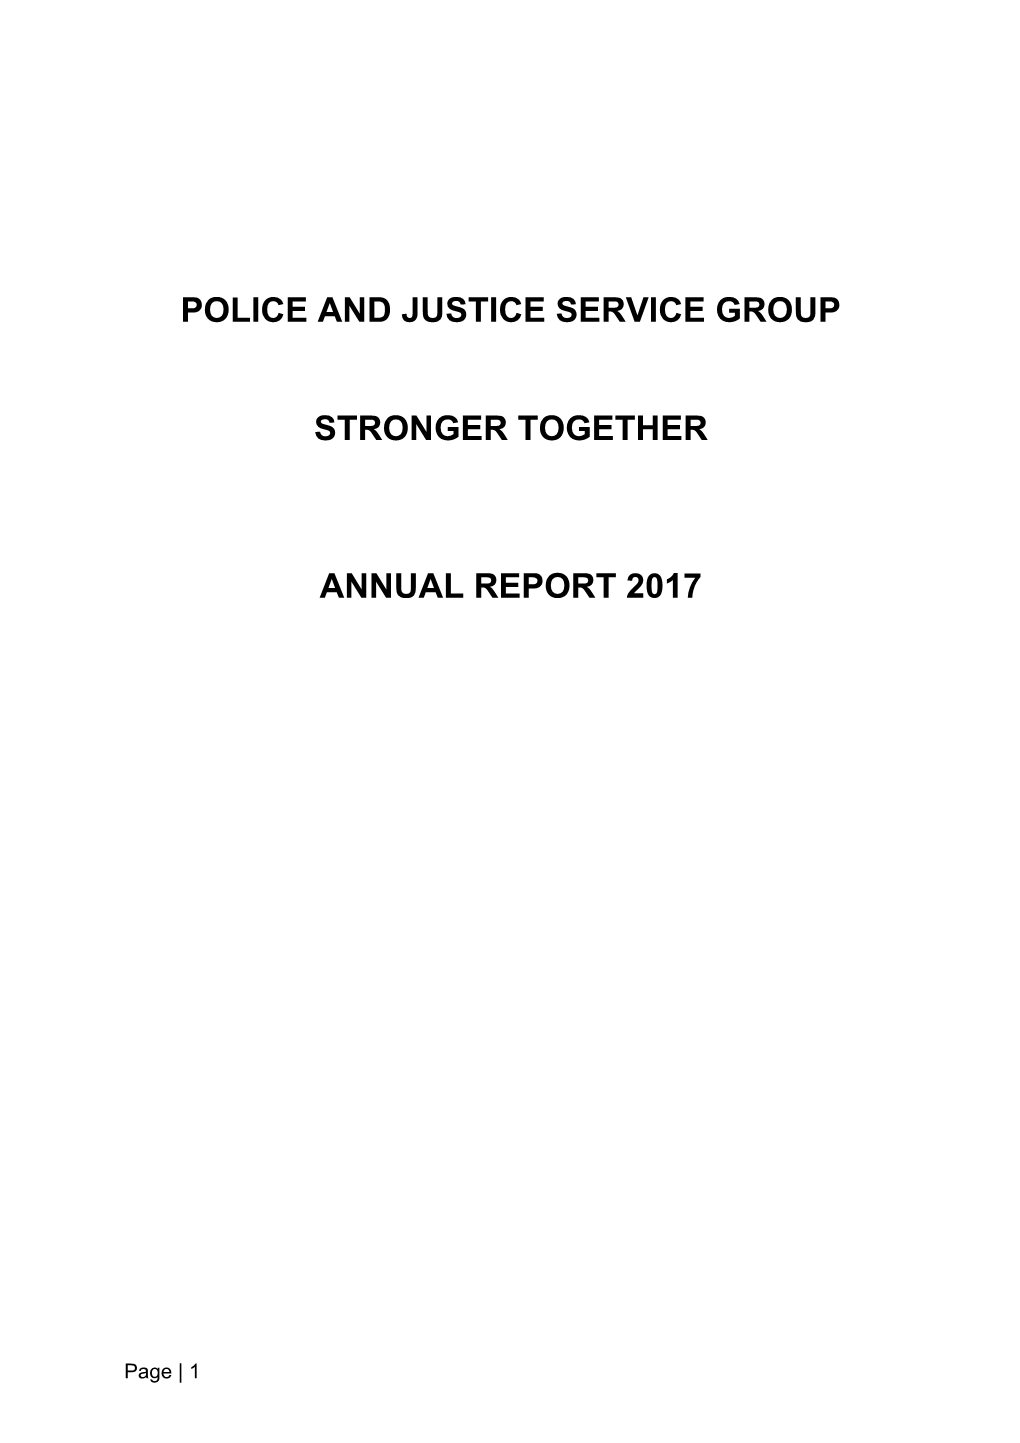 Police and Justice Service Group